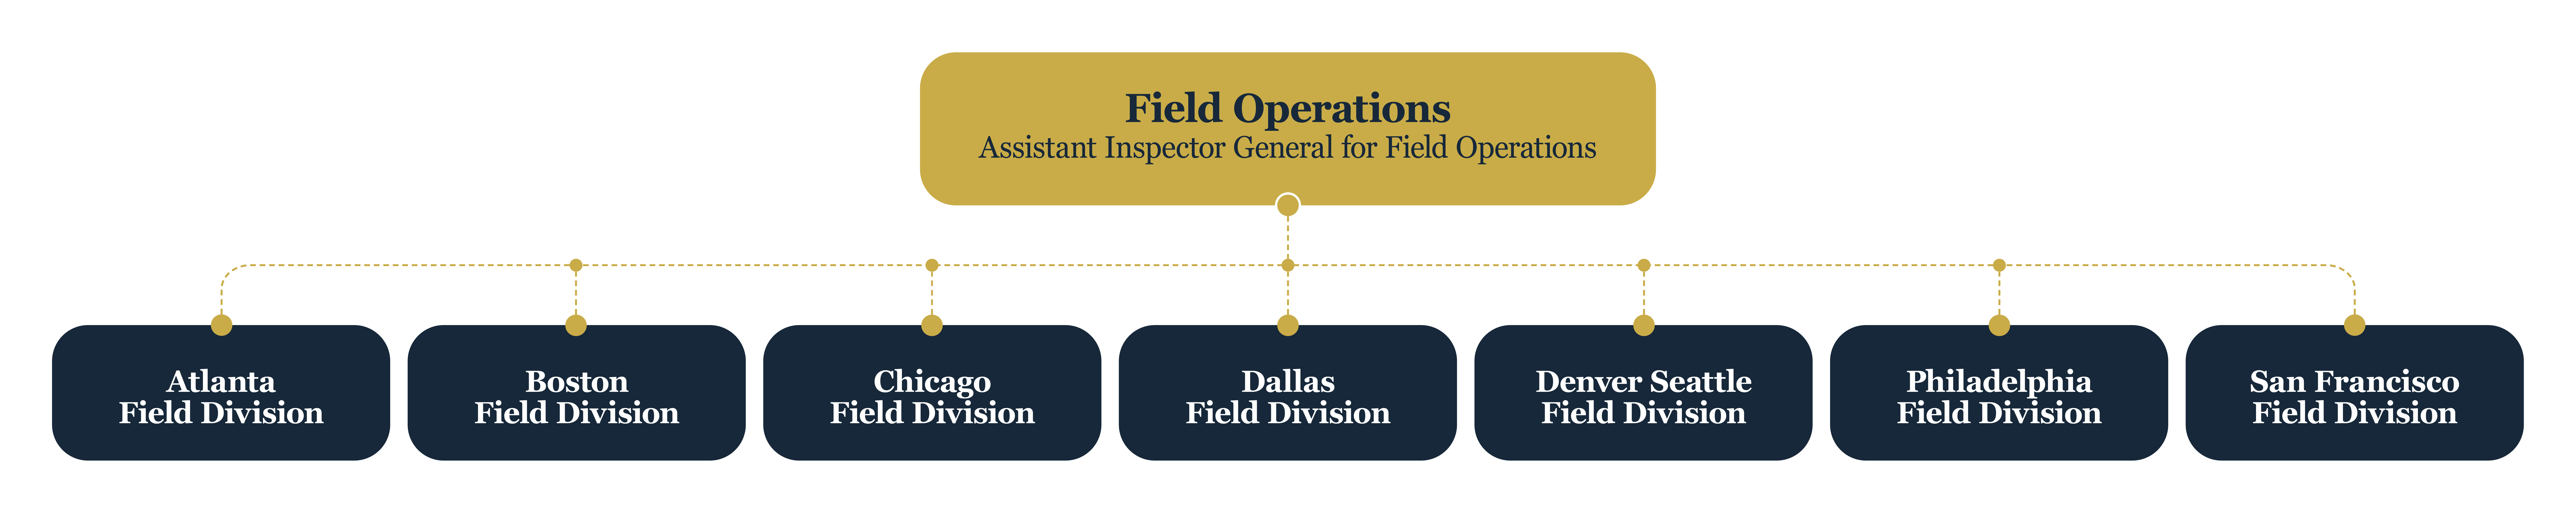 oig-org-chart-field-operations